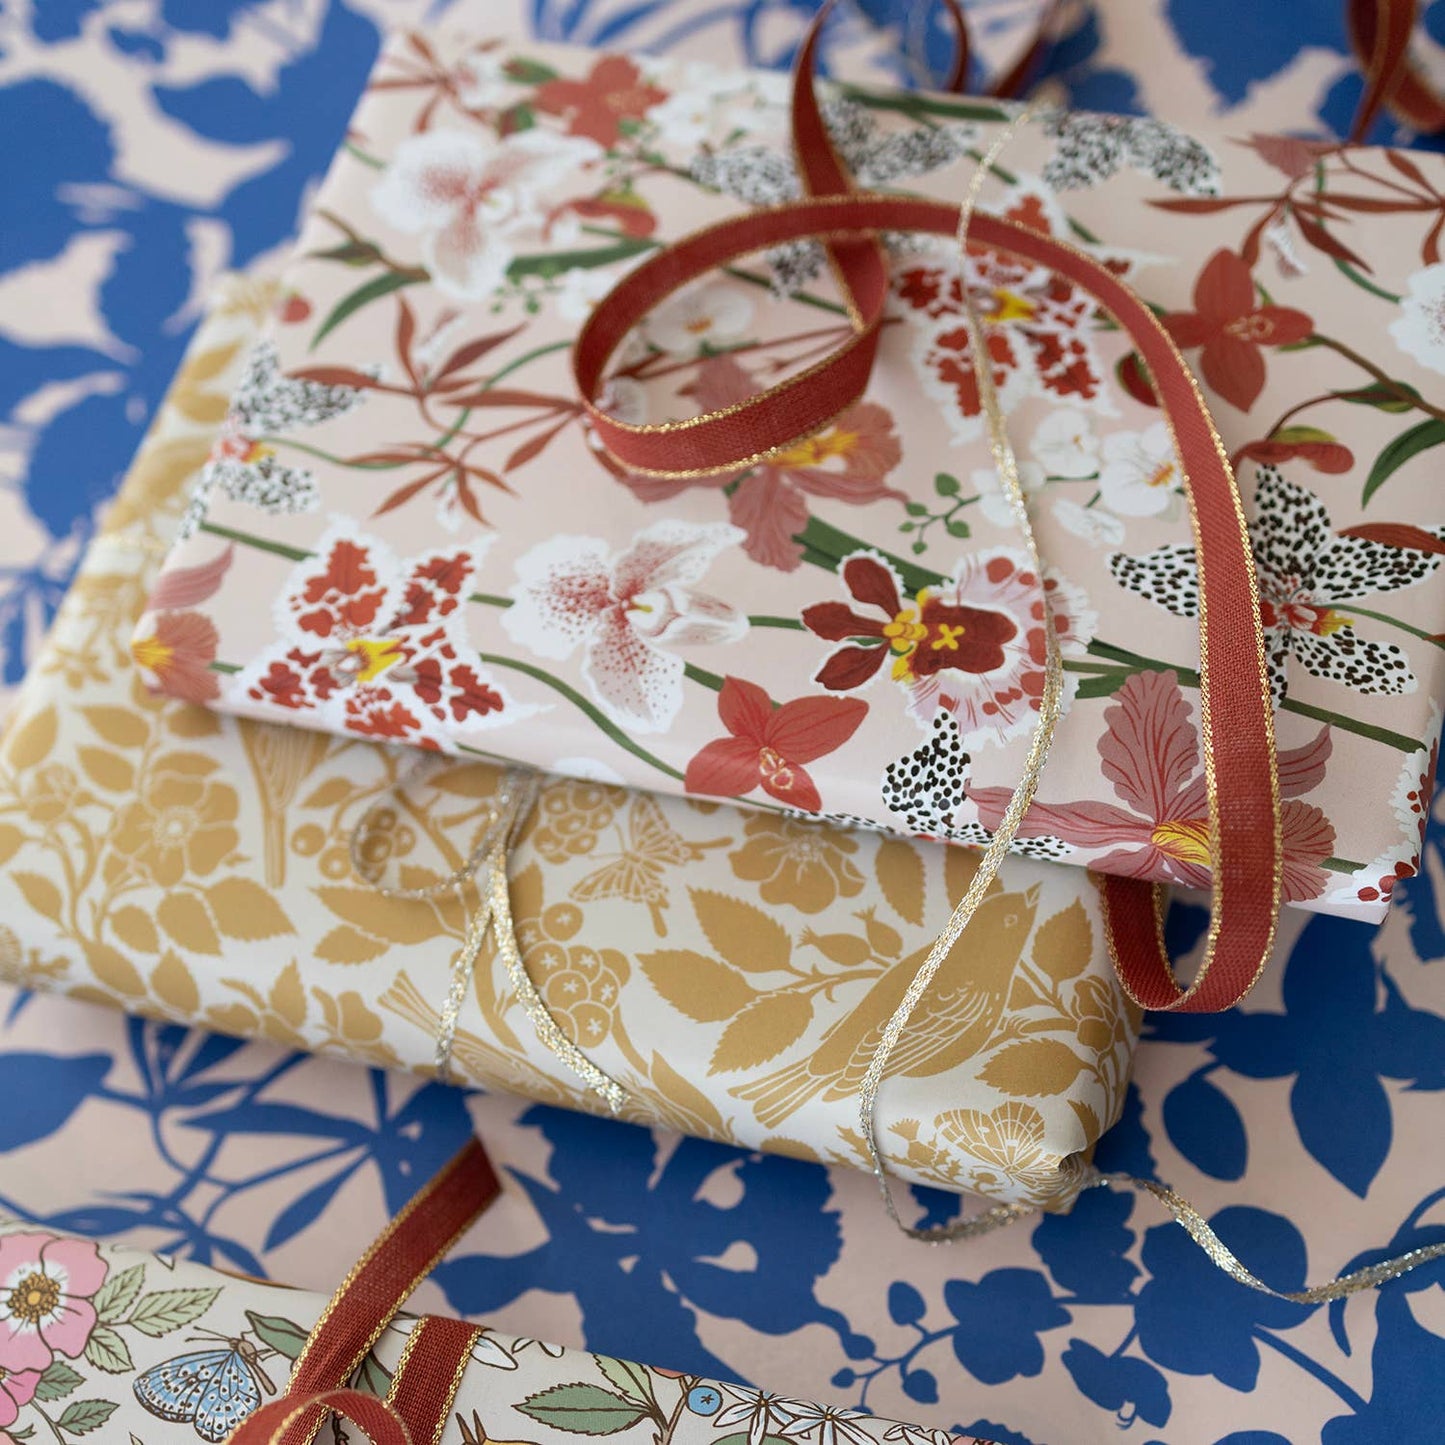 Botanica Paper Co. - SONGBIRDS | Double Sided Wrapping Paper